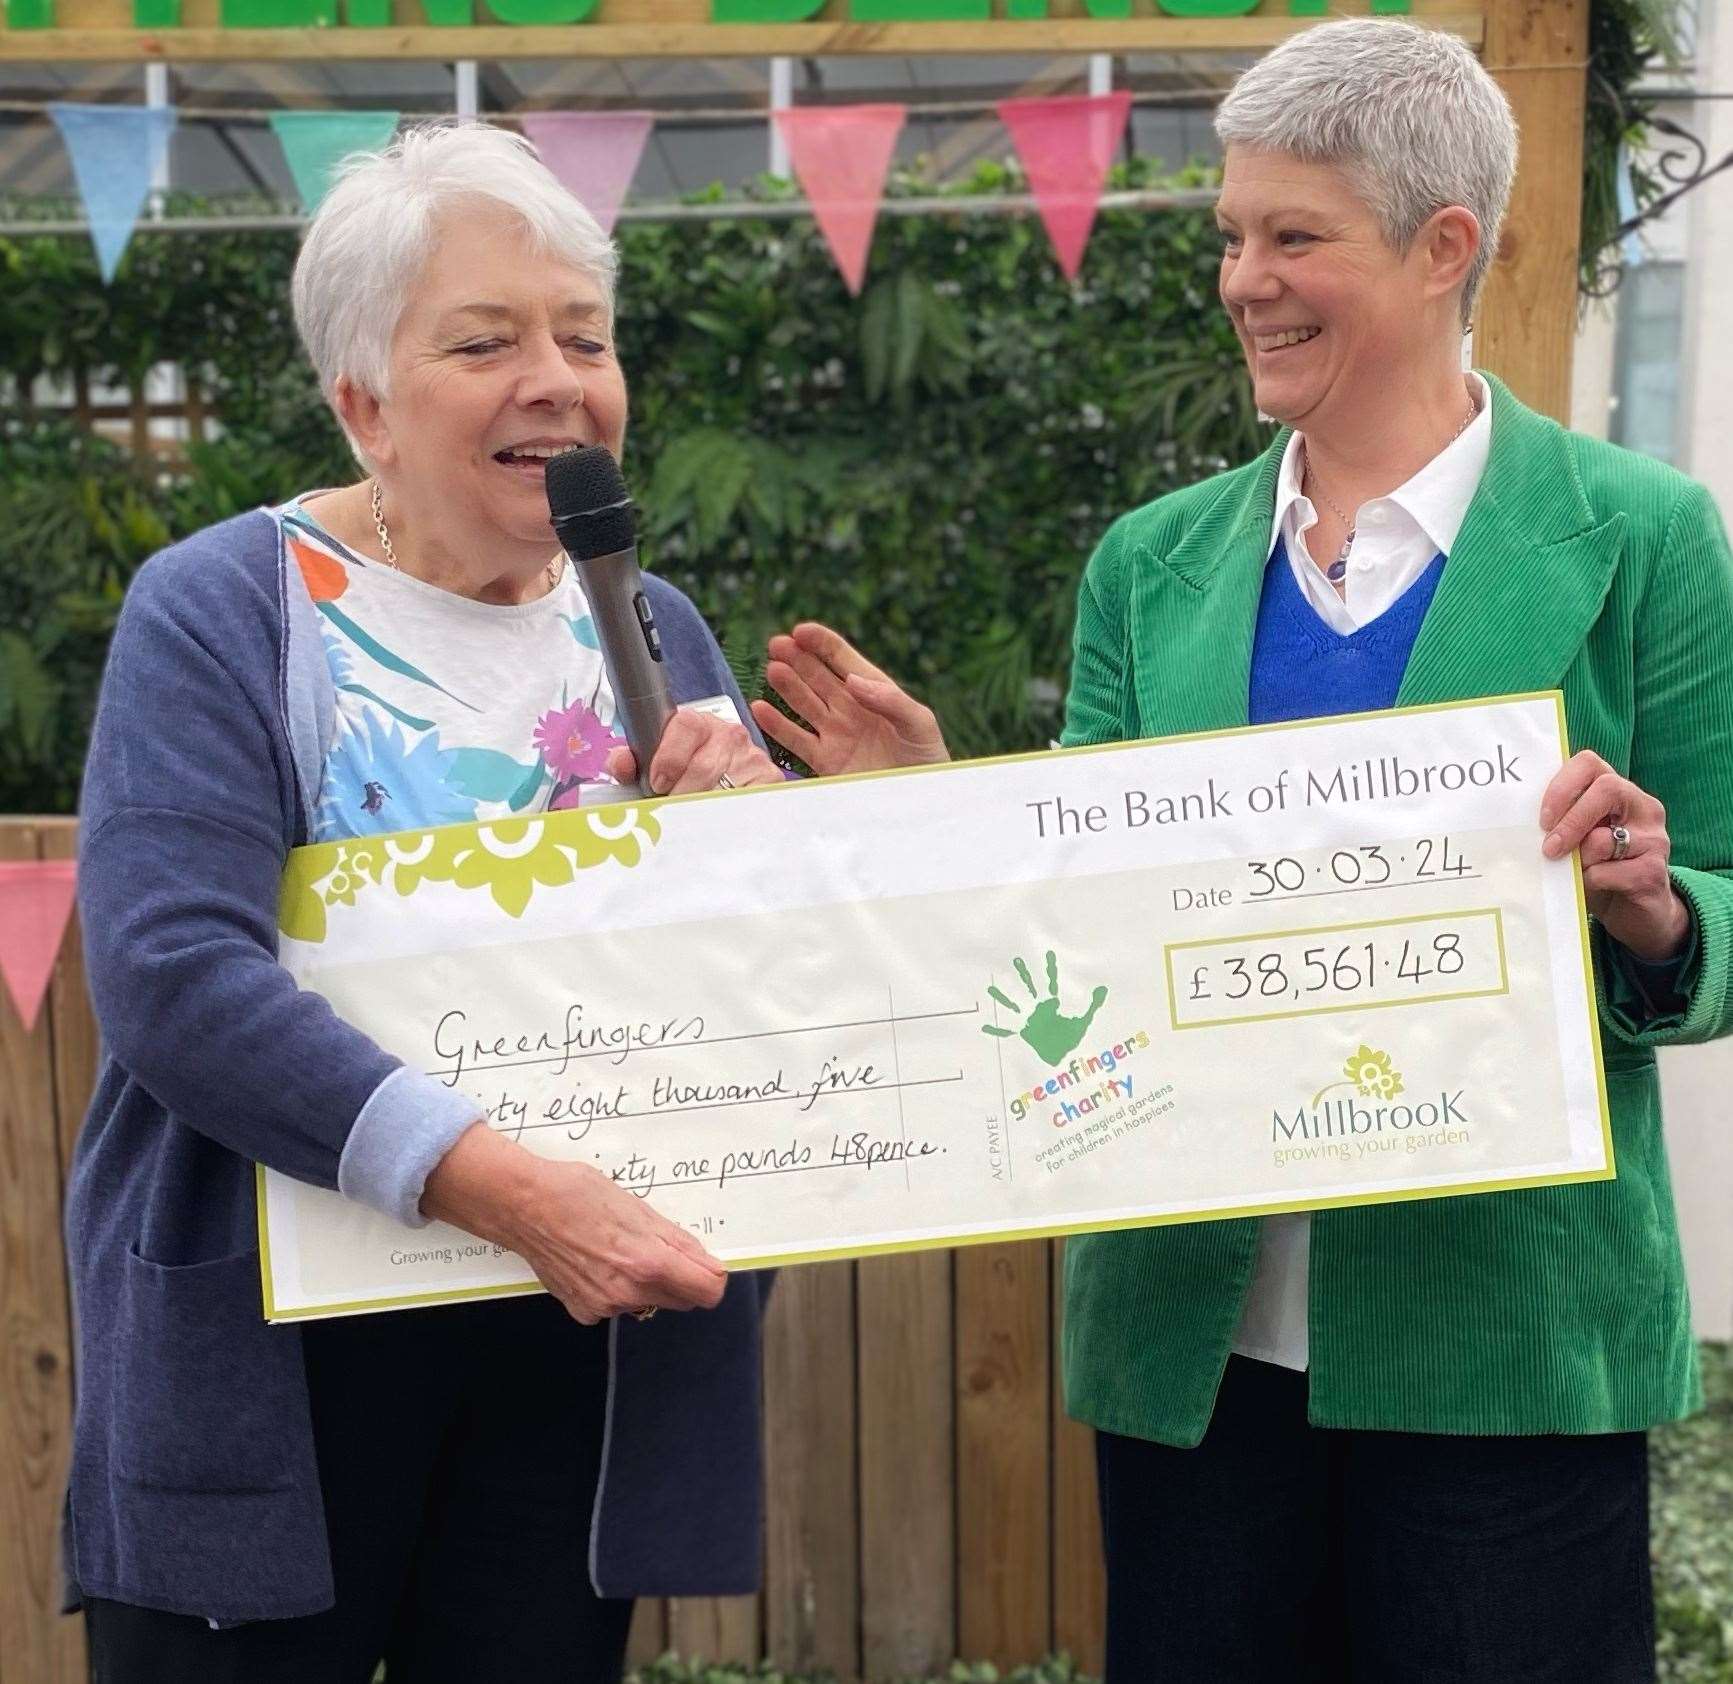 Greenfingers’ Chairman, Sue Allen, receiving the cheque from her daughter, Tammy Woodhouse, Managing Director of Millbrook Garden Company. Photo: Millbrook Garden Company.